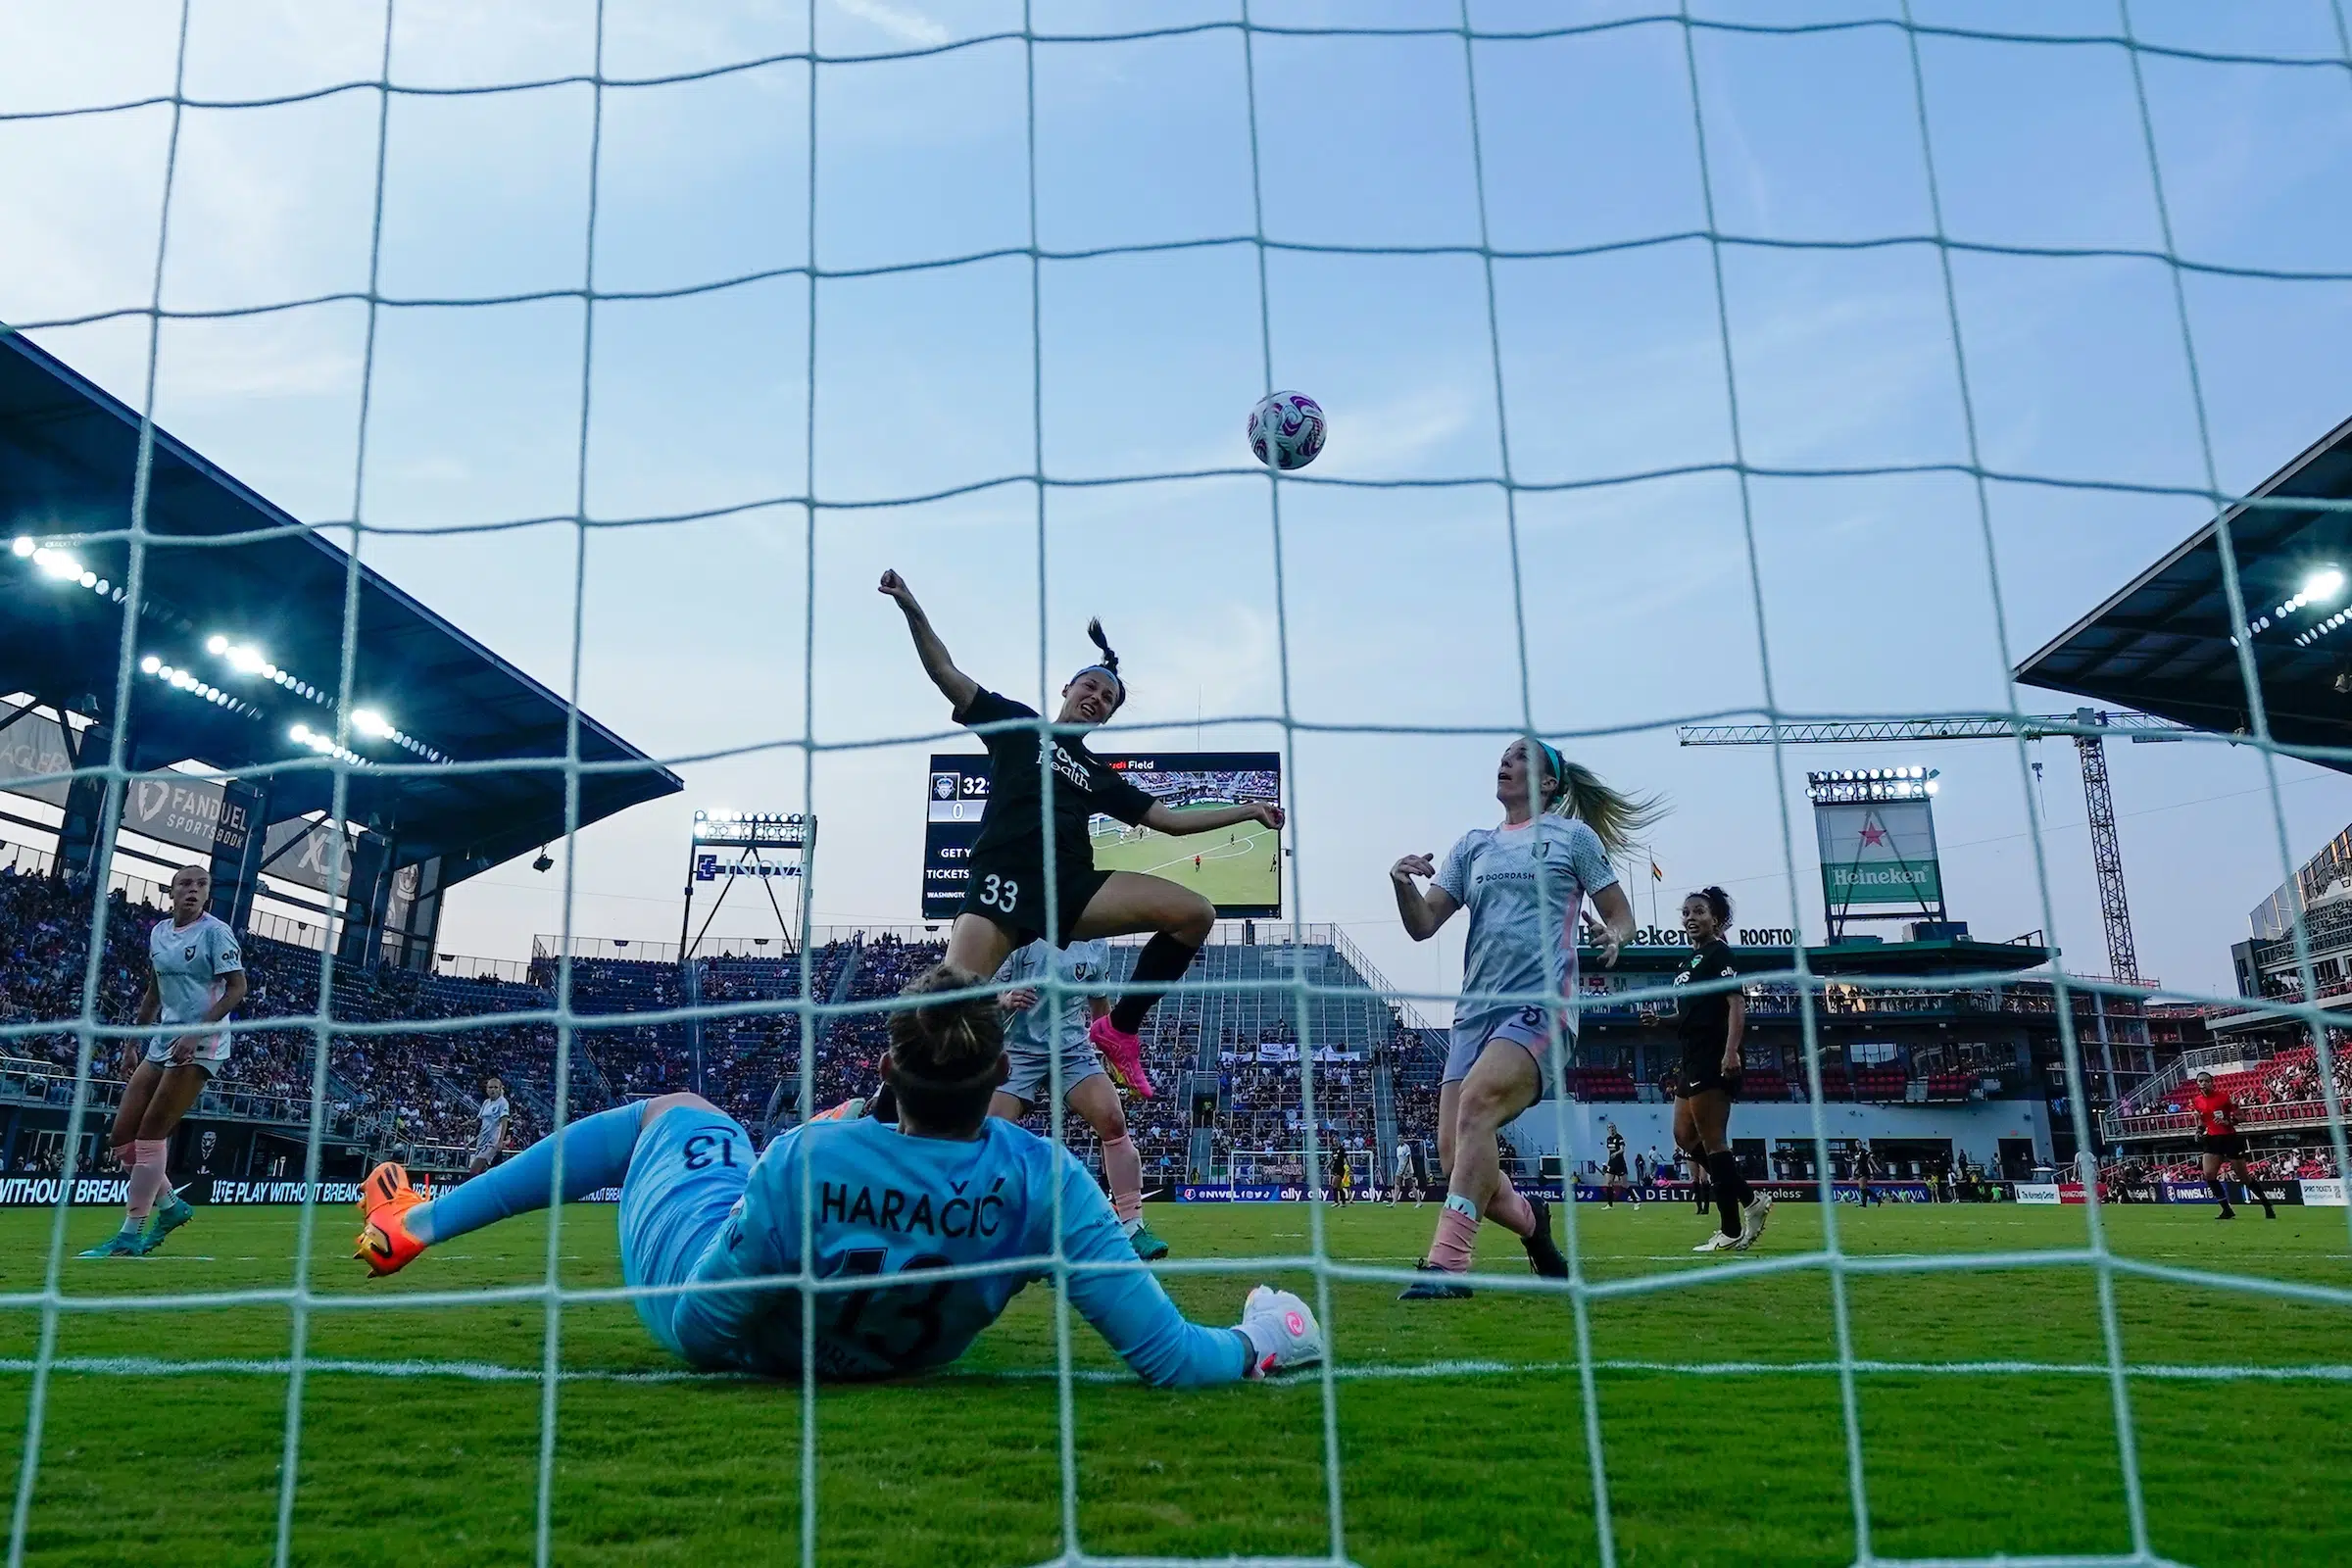 In a photo taken from behind a soccer goal, Ashley Hatch heads a soccer ball into the goal as a goalie in a blue uniform lies on the ground.